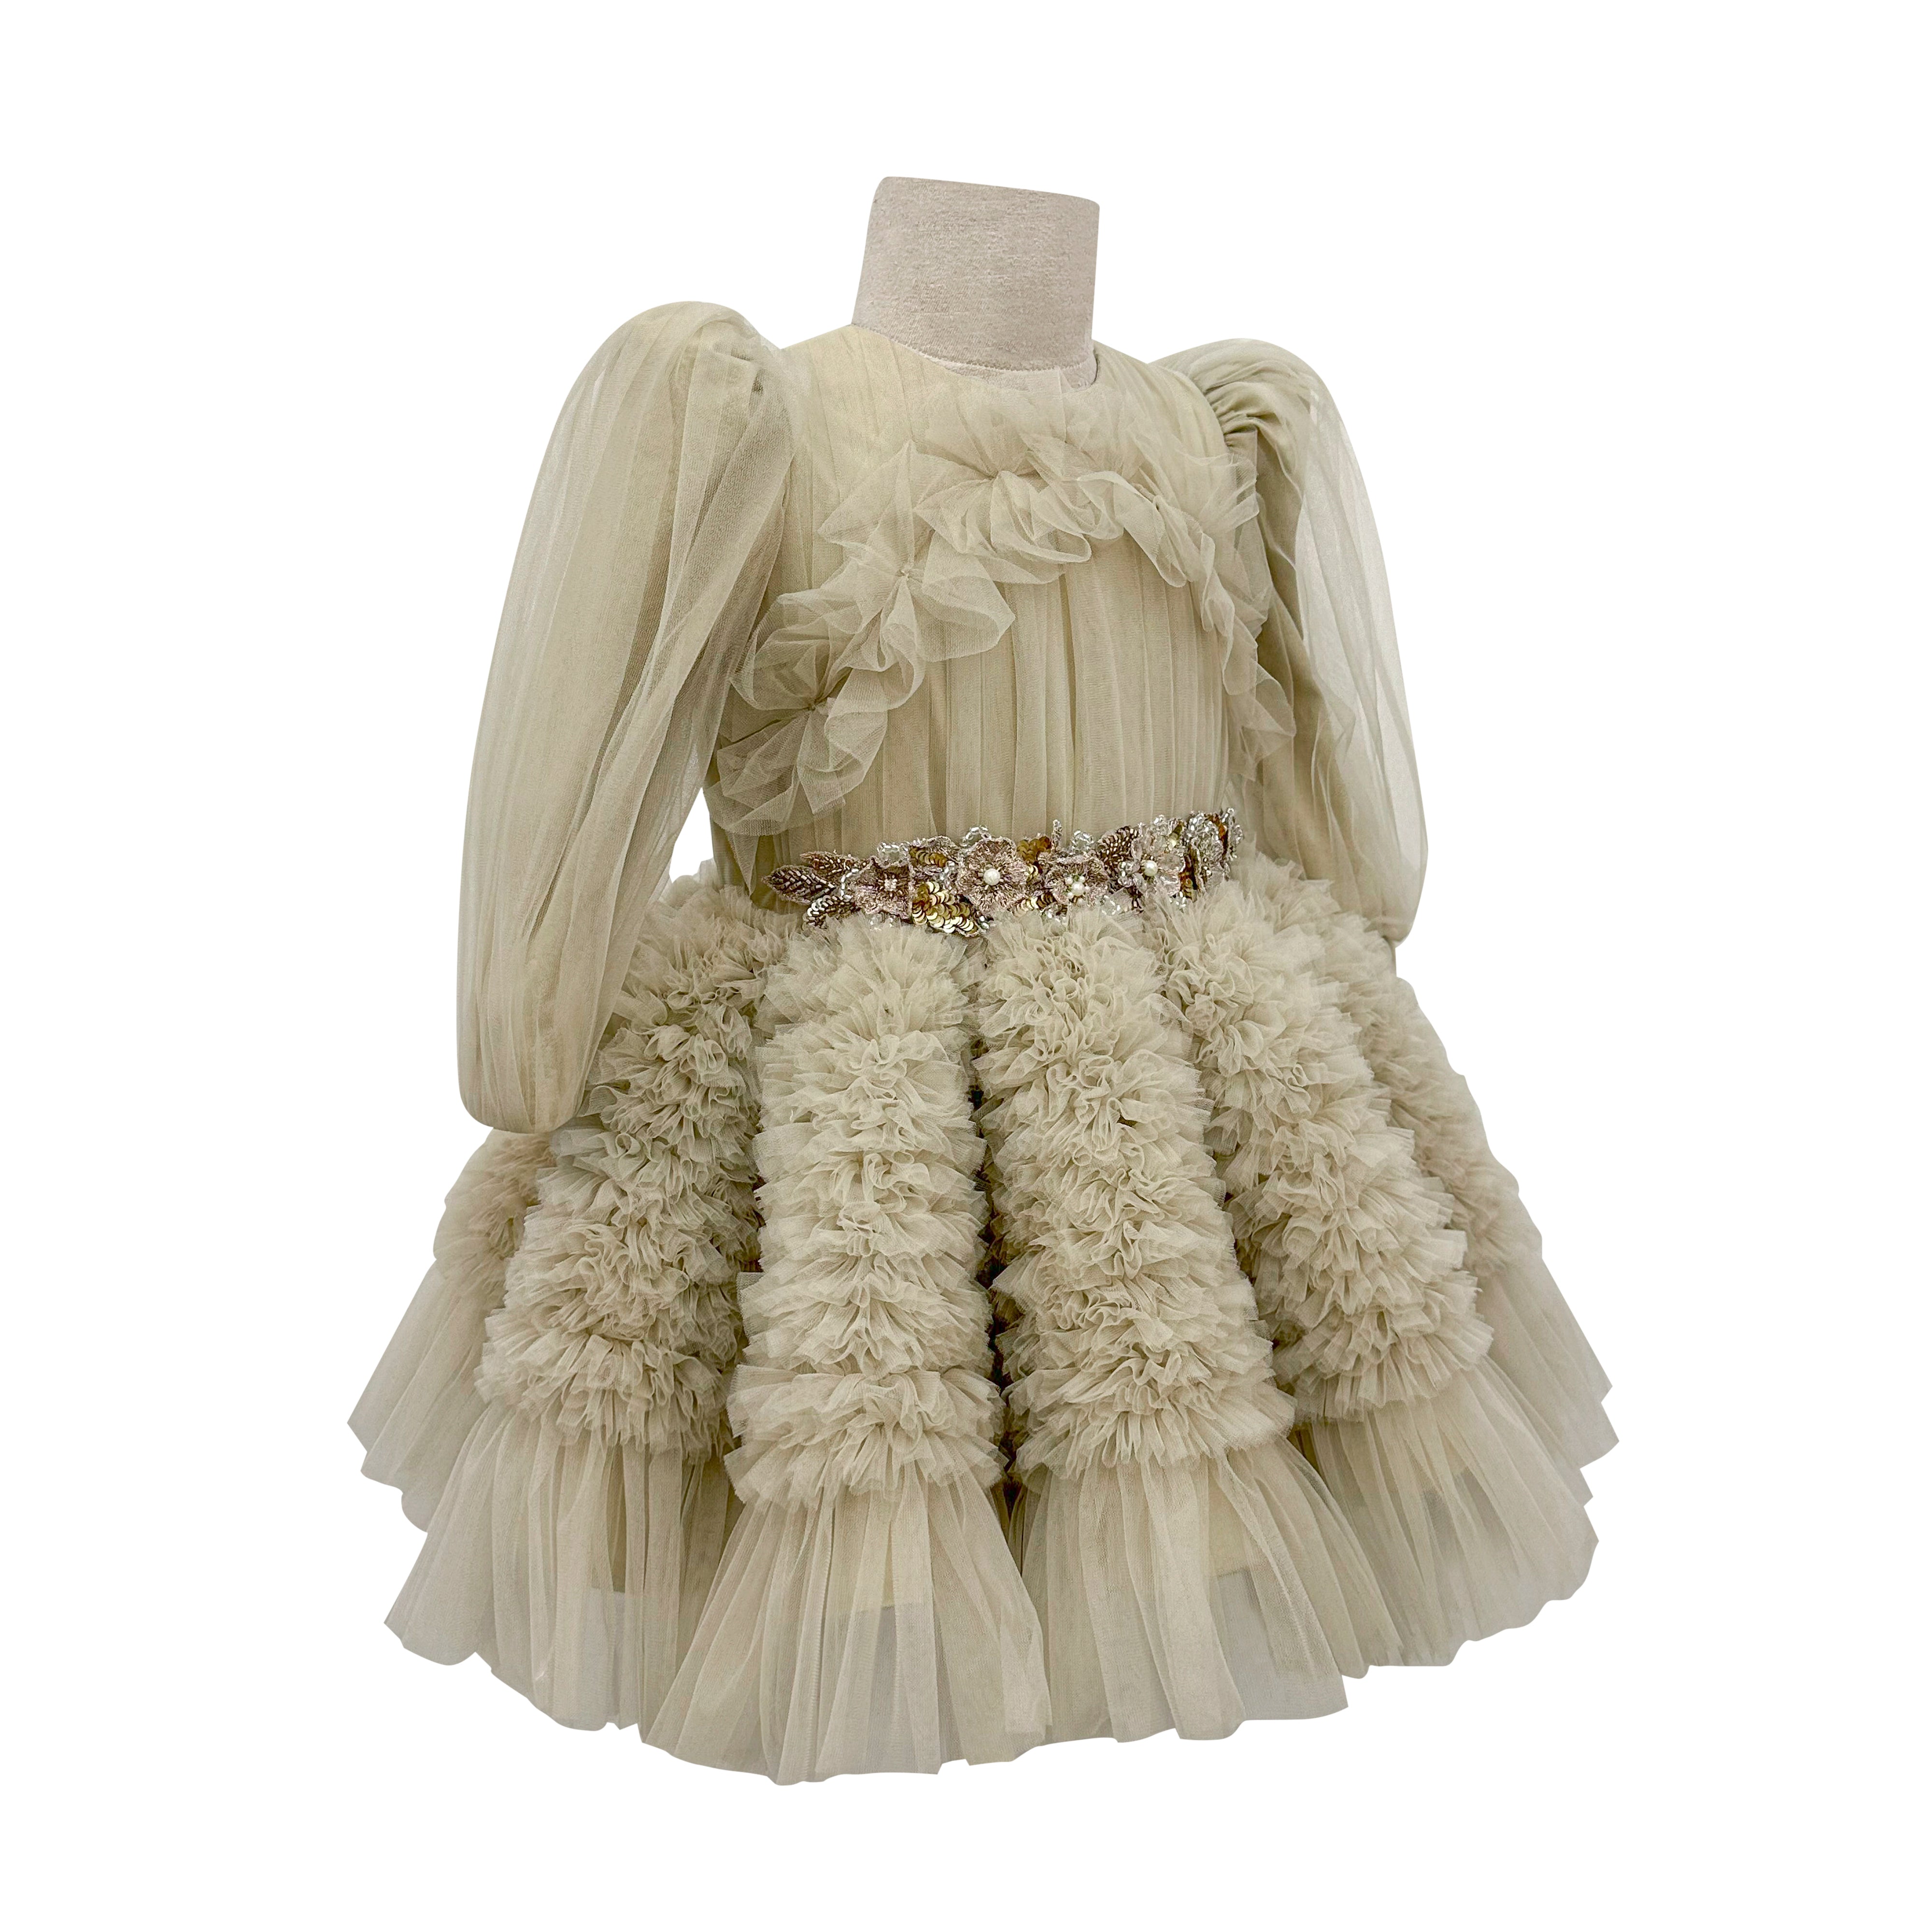 The Embellished Ariel Tulle Dress in Full Sleeves (Beige)